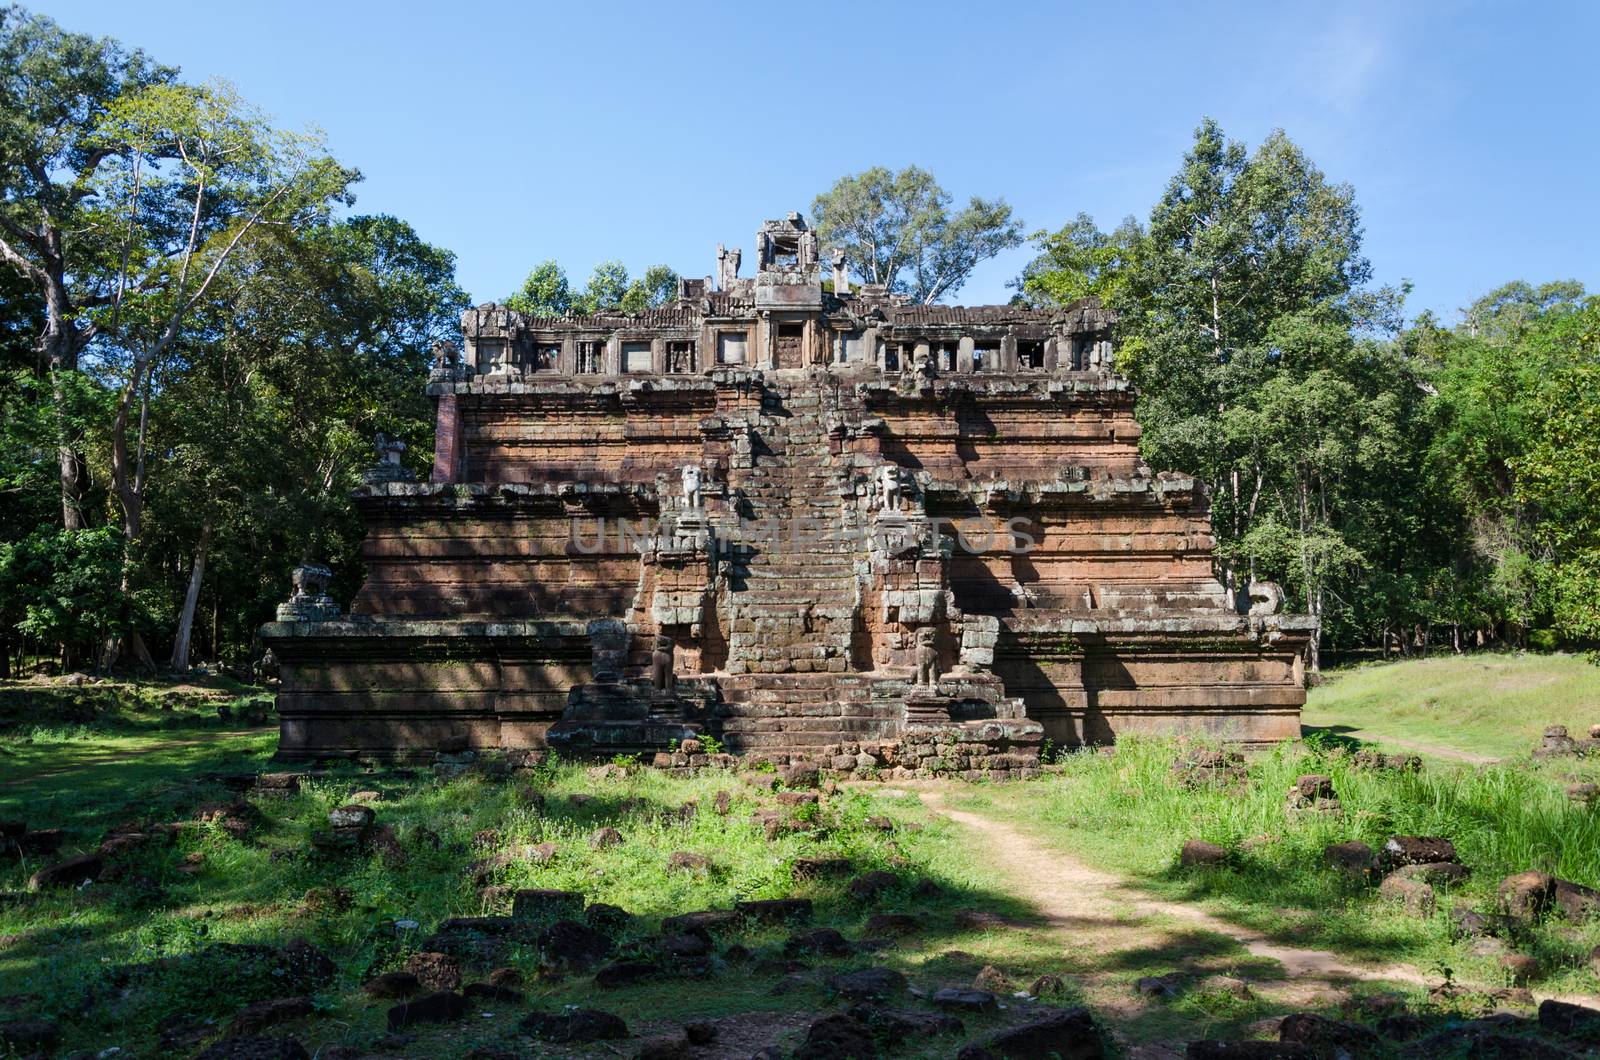 The celestial temple Phimeanakas is part of the royal palace Angkor Thom in Cambodia by siraanamwong